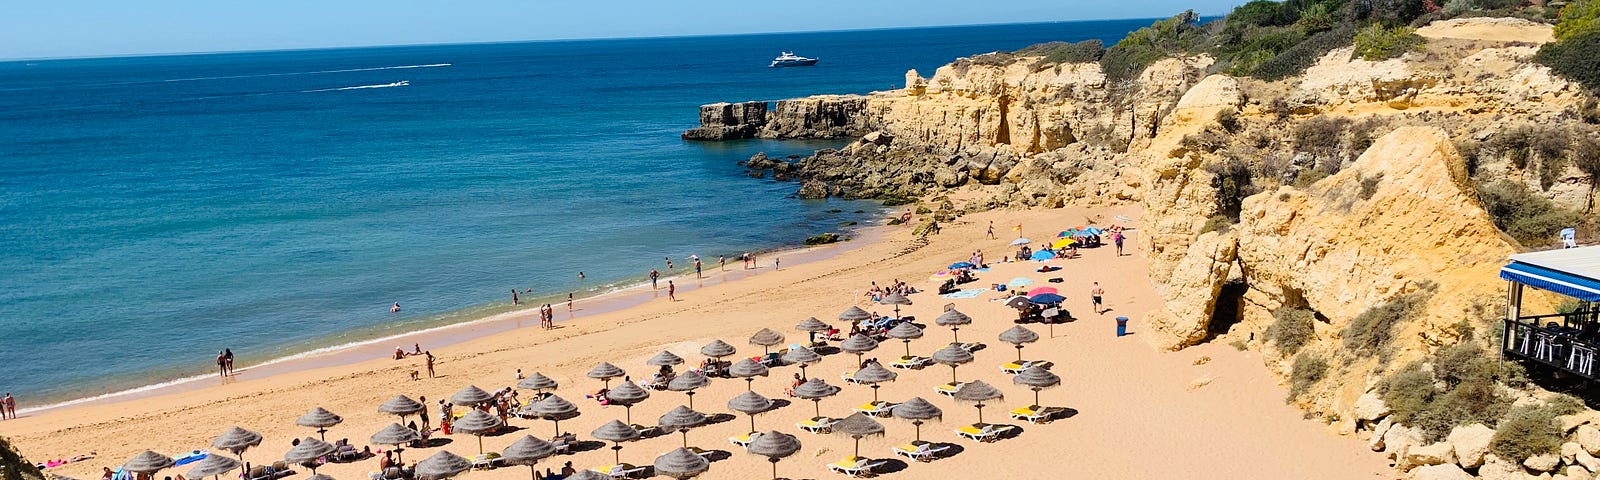 The Algarve where Madeleine McCann was abducted.